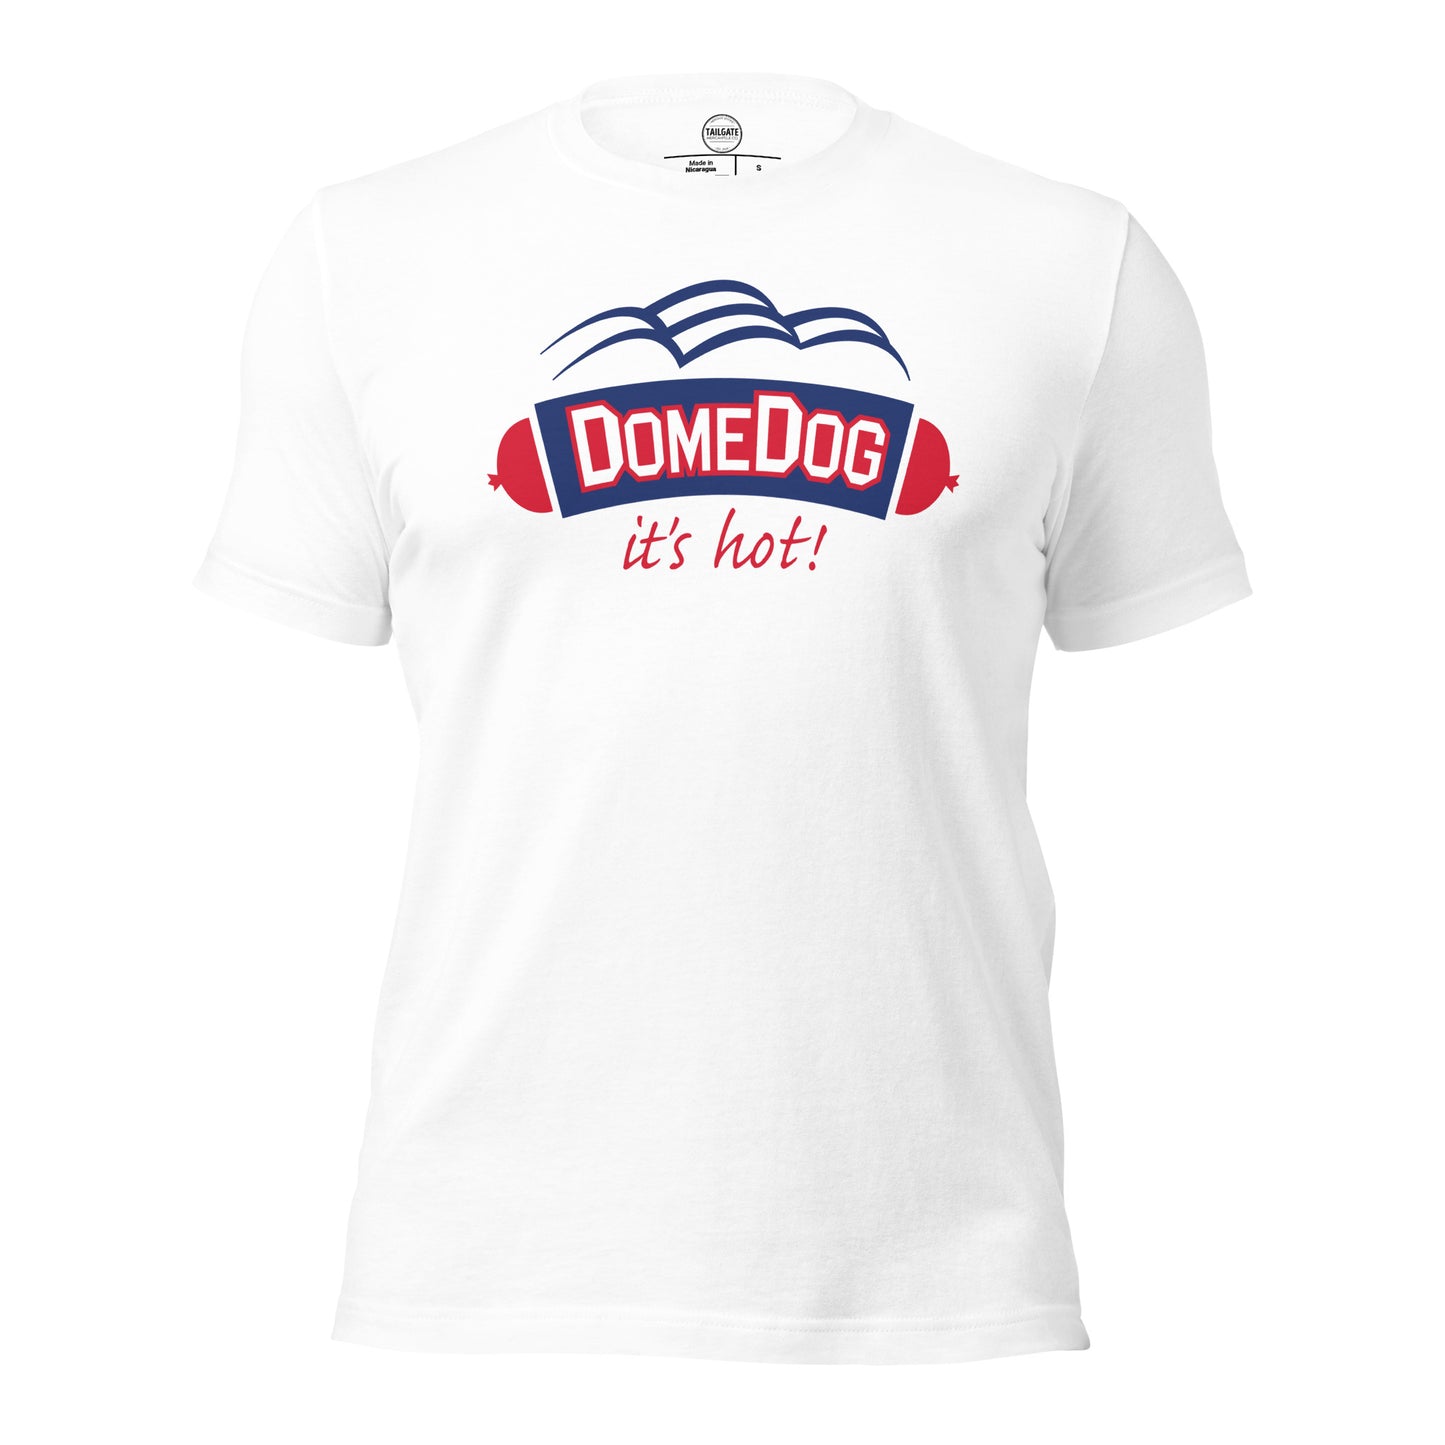 **ONLINE EXCLUSIVE** TMCo Metrodome Dome Dog Unisex T-shirt